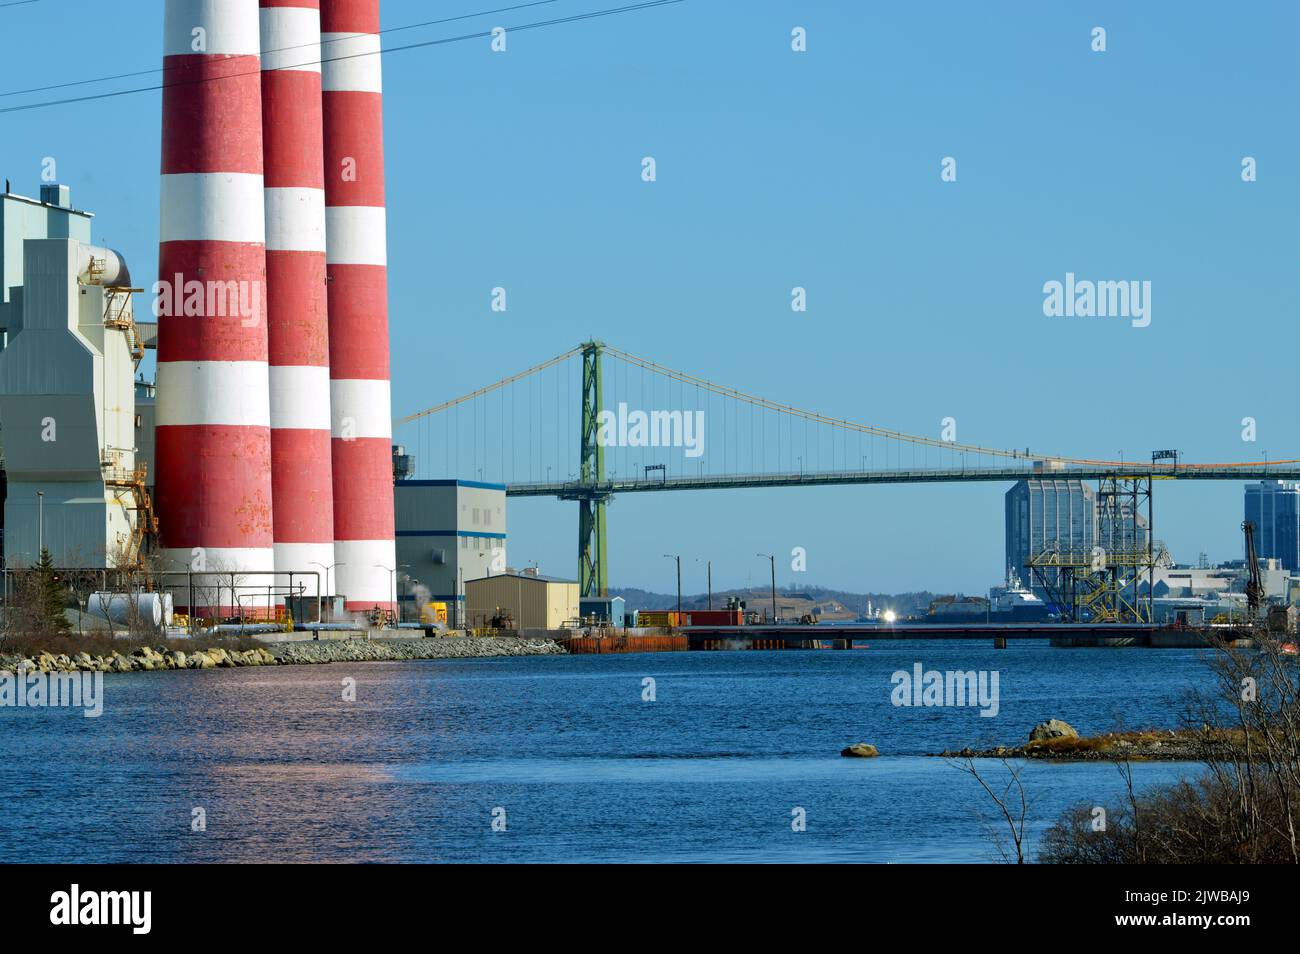 Tufts Cove Generating Station in Dartmouth, Nova Scotia, Canada, a Nova Scotia Power electricity generation plant commissioned in 1965. Stock Photo